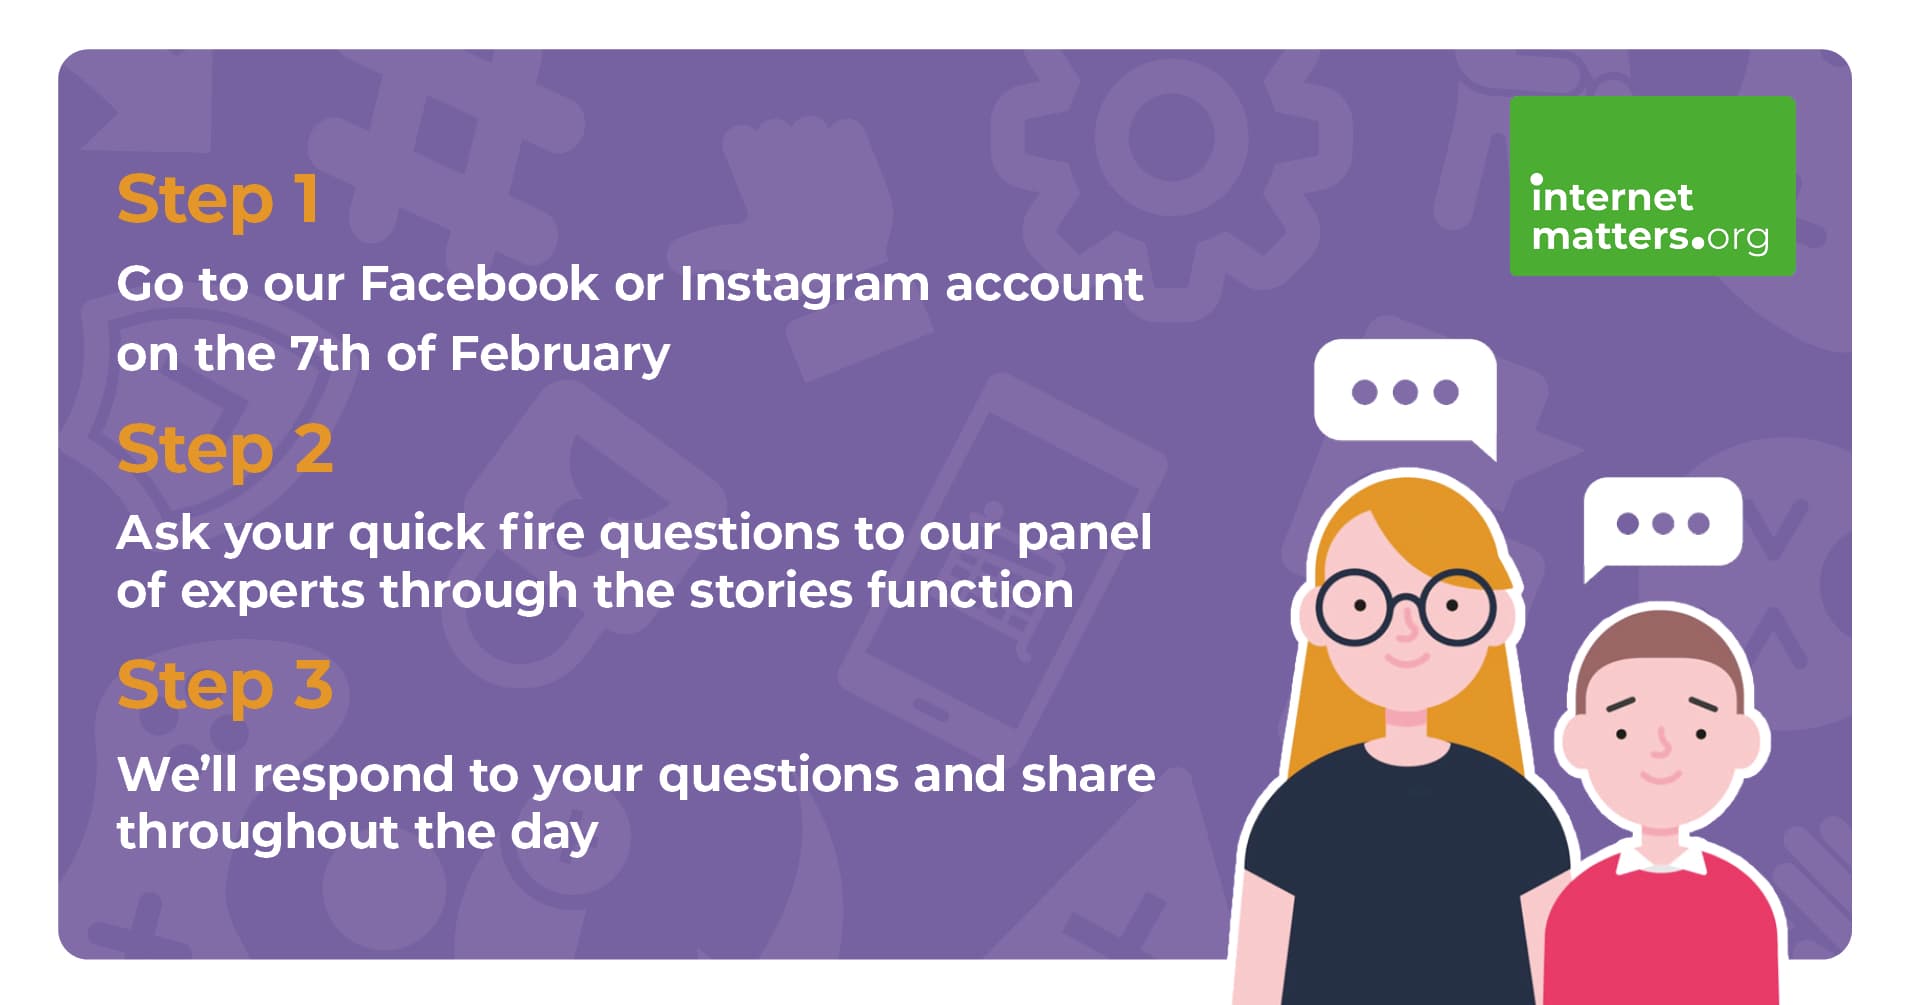 Instructional image that reads: 'Step 1: Go to our Facebook or Instagram account on the 7th of February, Step 2: Ask your quick fire questions to our panel of experts through the stories function, Step 3: We'll respond to your questions and share throughout the day.'